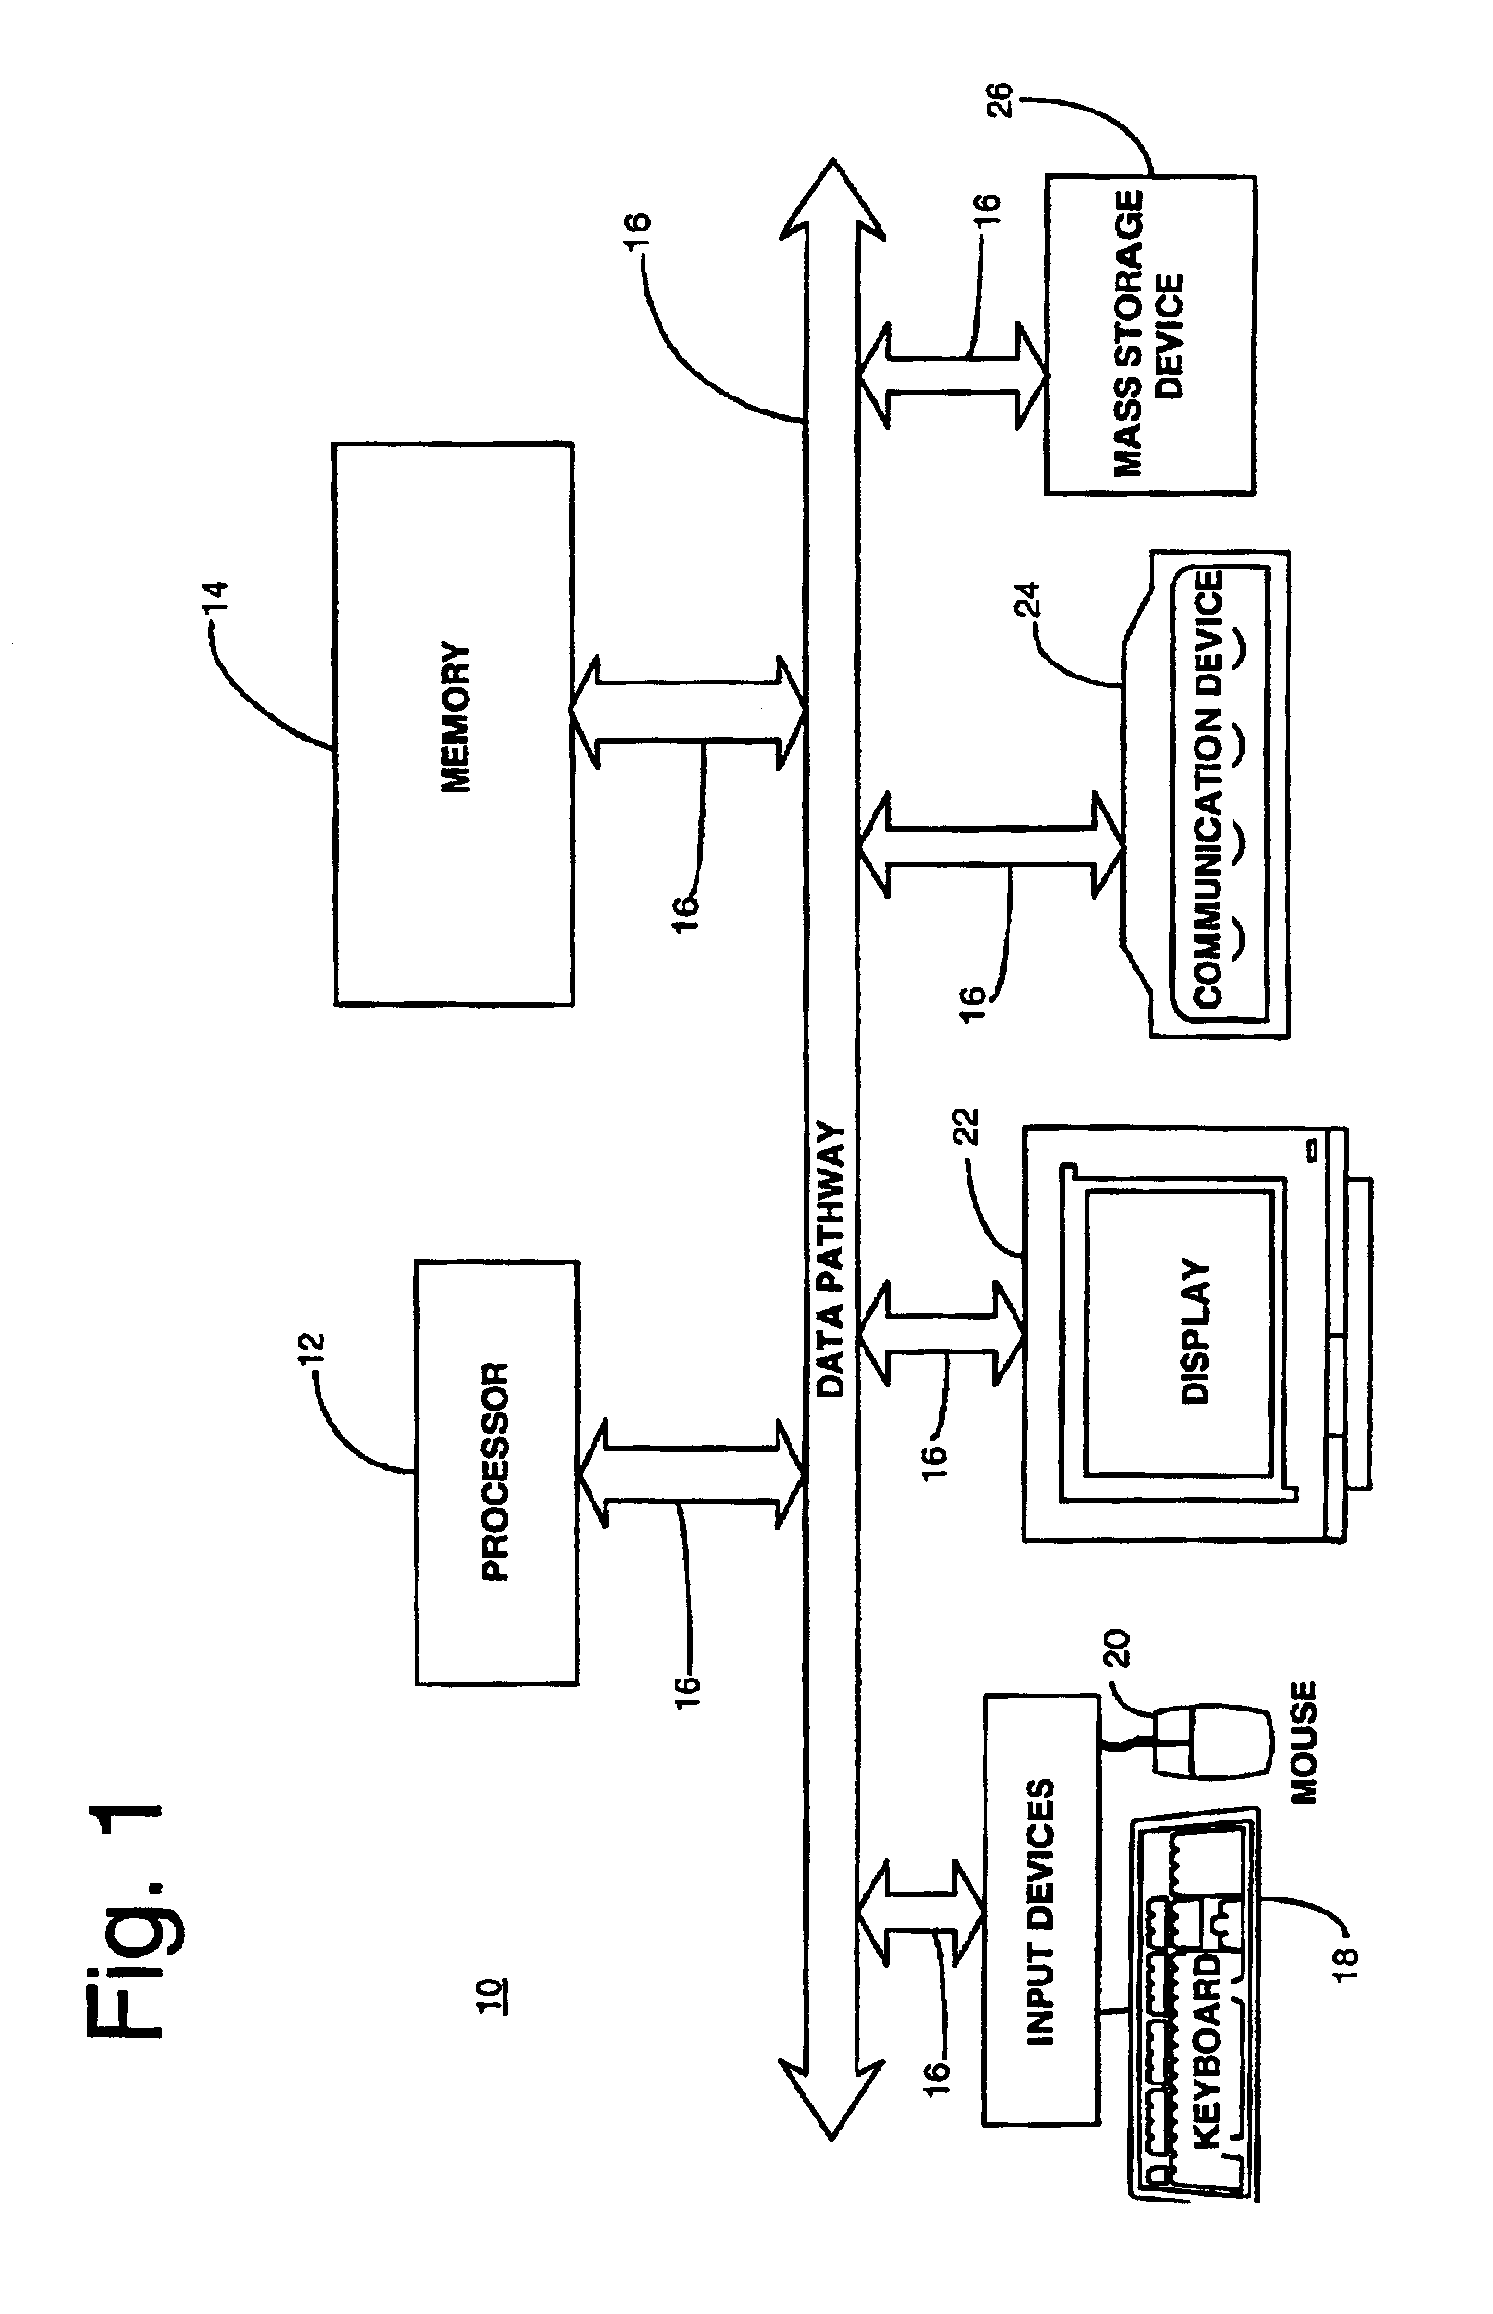 System, method and computer product for performing automated predictive reliability